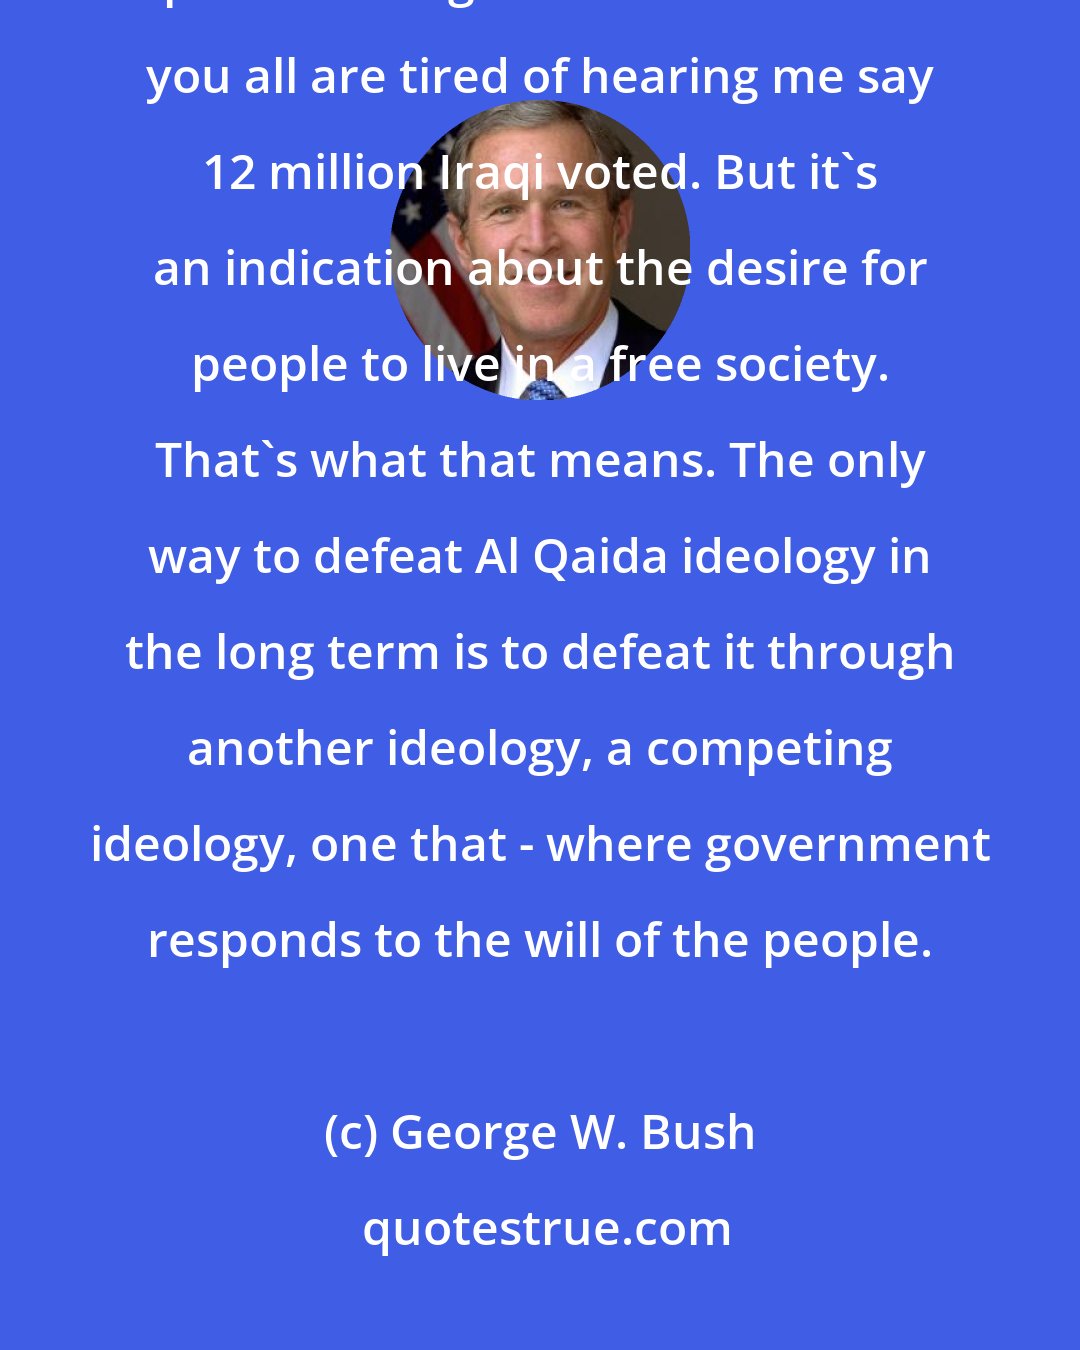 George W. Bush: The challenge in Iraq is to provide a security plan such that a political process can go forward. I'm sure you all are tired of hearing me say 12 million Iraqi voted. But it's an indication about the desire for people to live in a free society. That's what that means. The only way to defeat Al Qaida ideology in the long term is to defeat it through another ideology, a competing ideology, one that - where government responds to the will of the people.